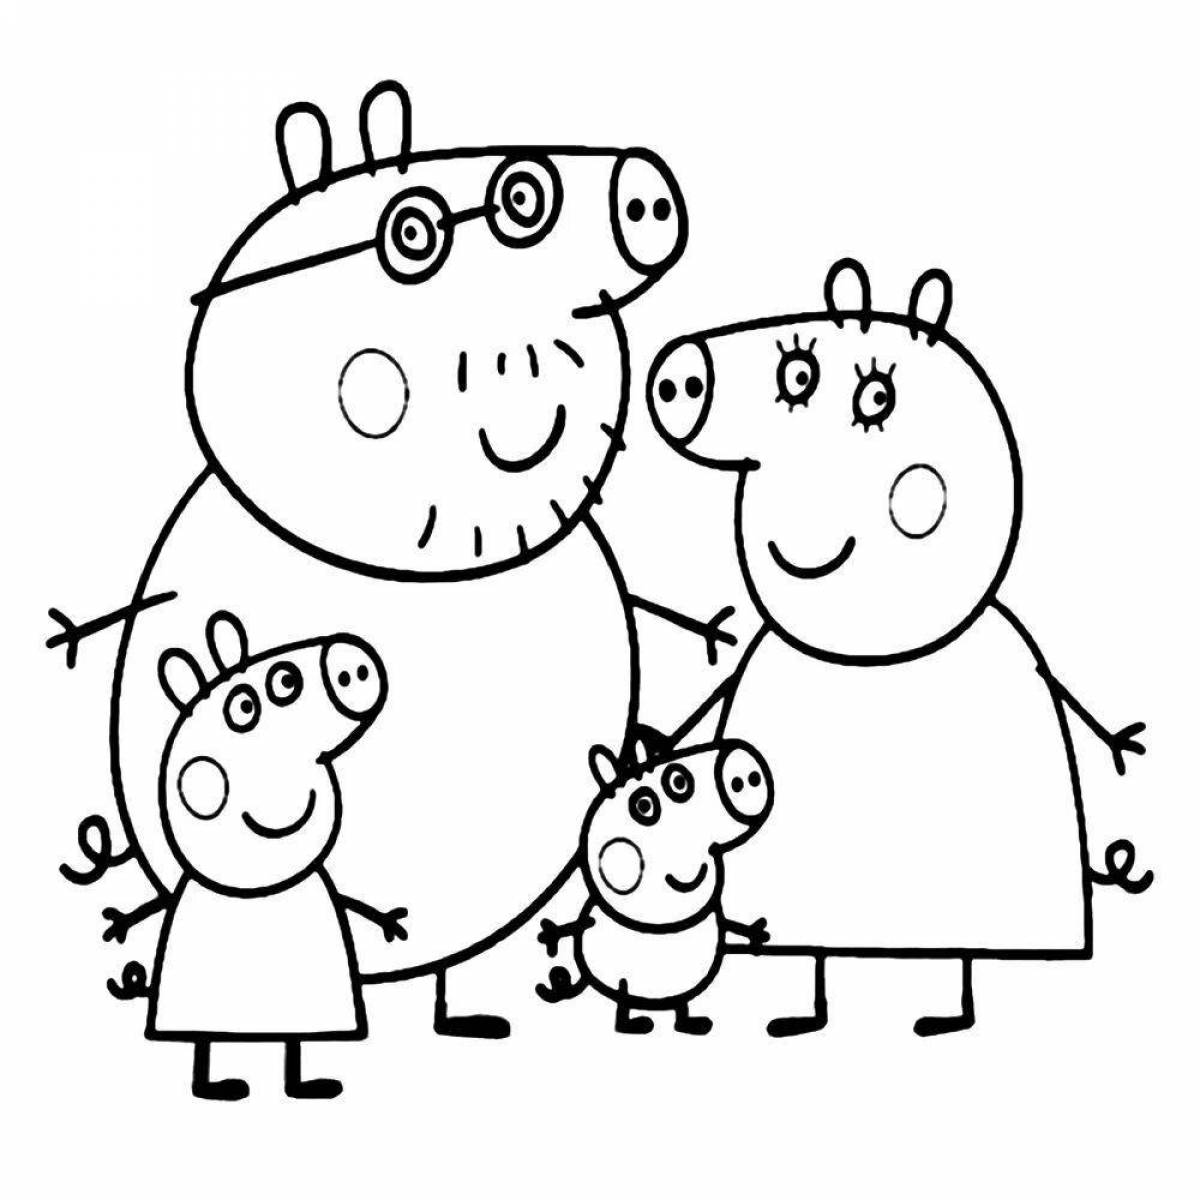 Adorable peppa pig coloring book for kids